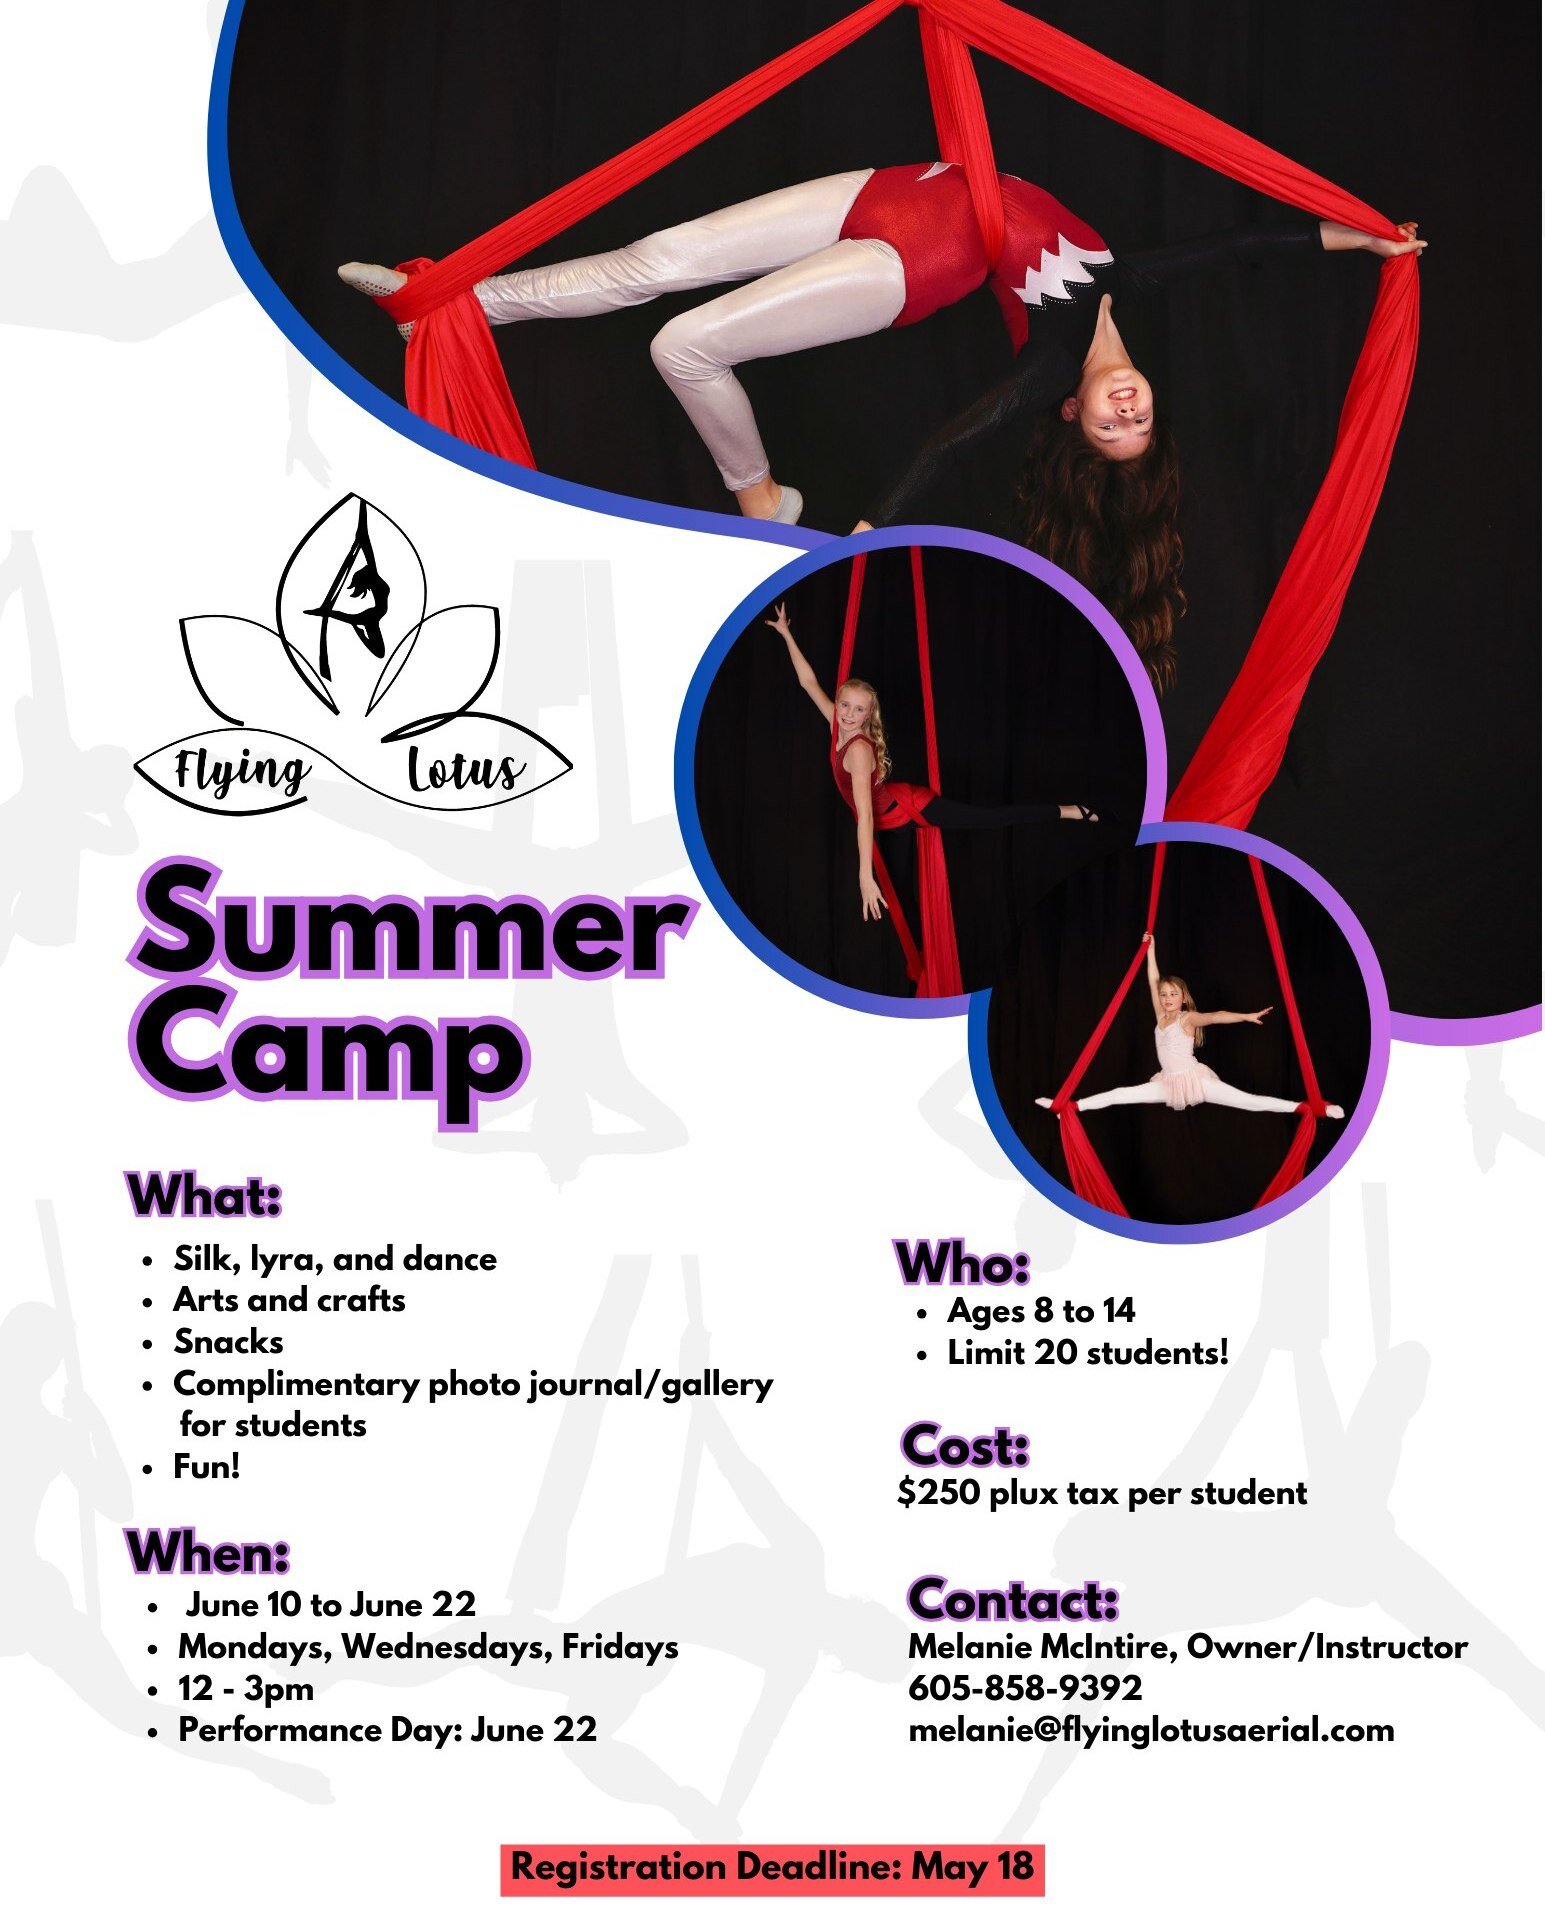 Summer camp registrations are open and underway.

We have limited spots (20 students) so be sure to register before May 18th to secure your spot!

Contact melanie@flyinglotusaerial.com or call/text Melanie at 605-858-9392.